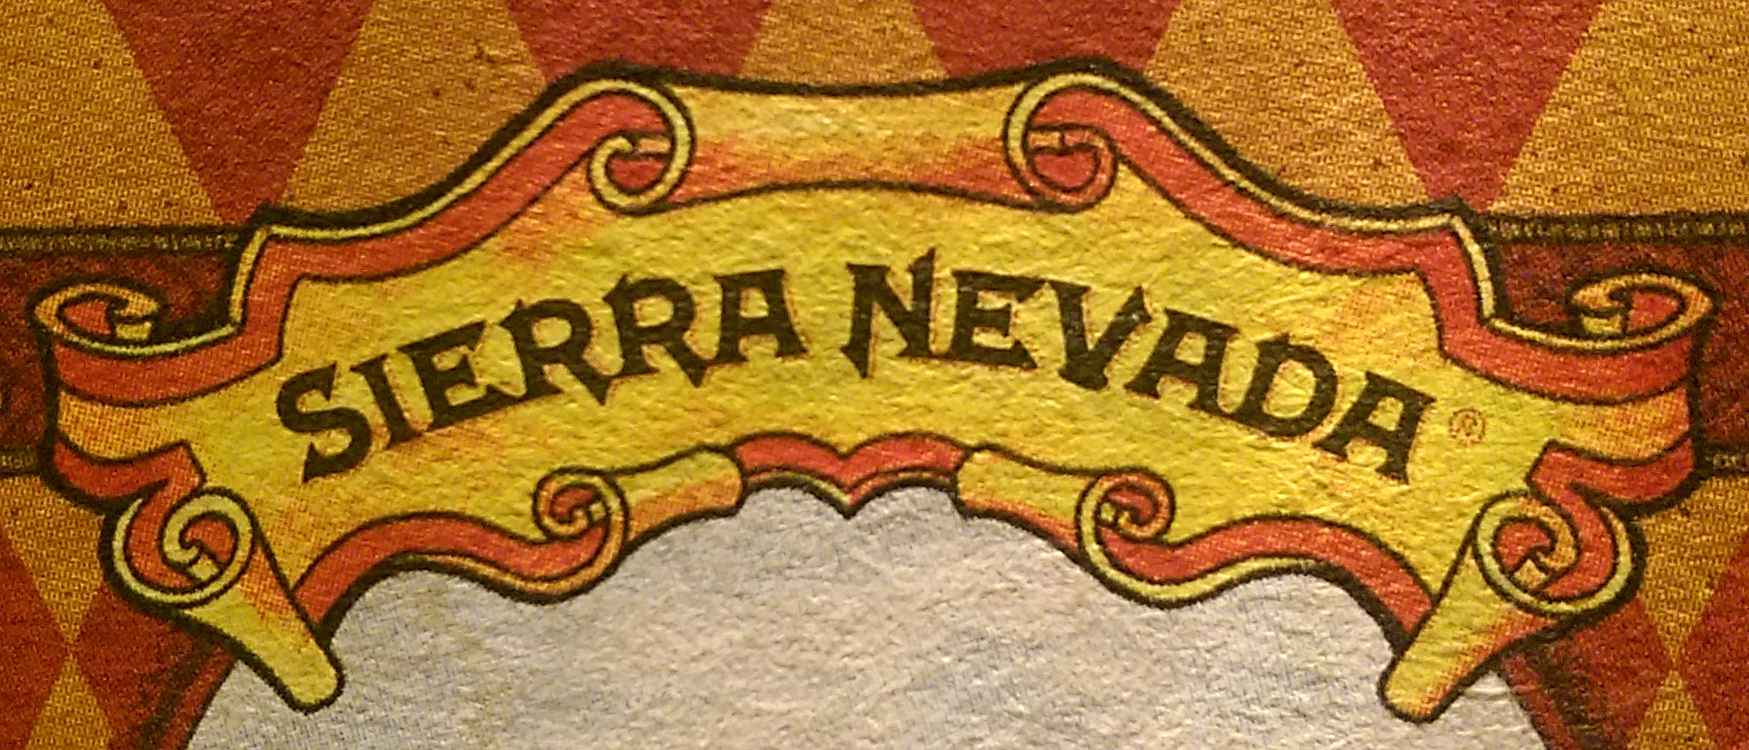 A Visit at the Sierra Nevada Brewing Company